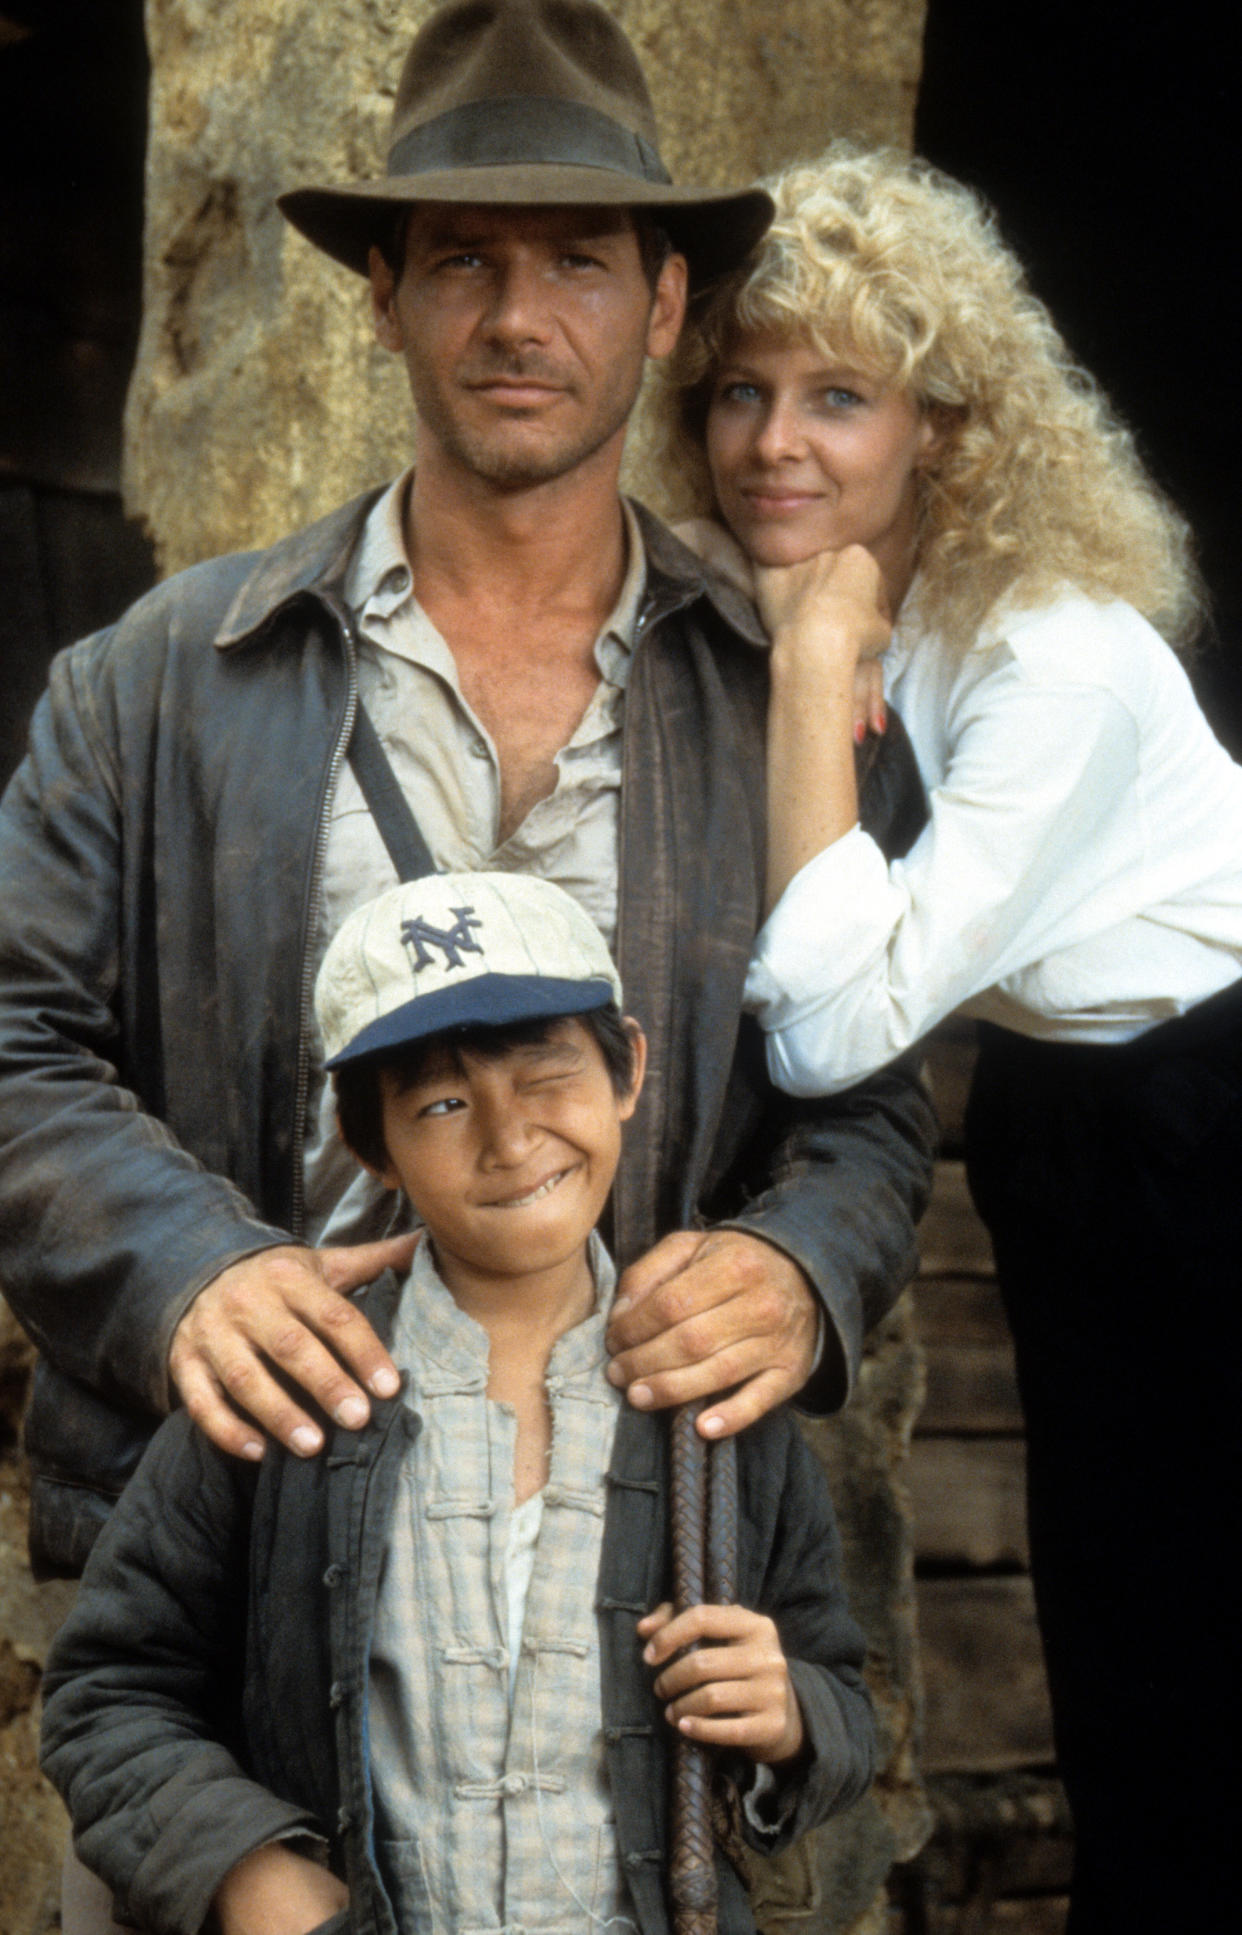 Harrison Ford and Ke Huy Quan (then known as Jonathan Ke Quan) starred with Kate Capshaw in 1984's Indiana Jones and the Temple of Doom. (Photo: Paramount/Getty Images)